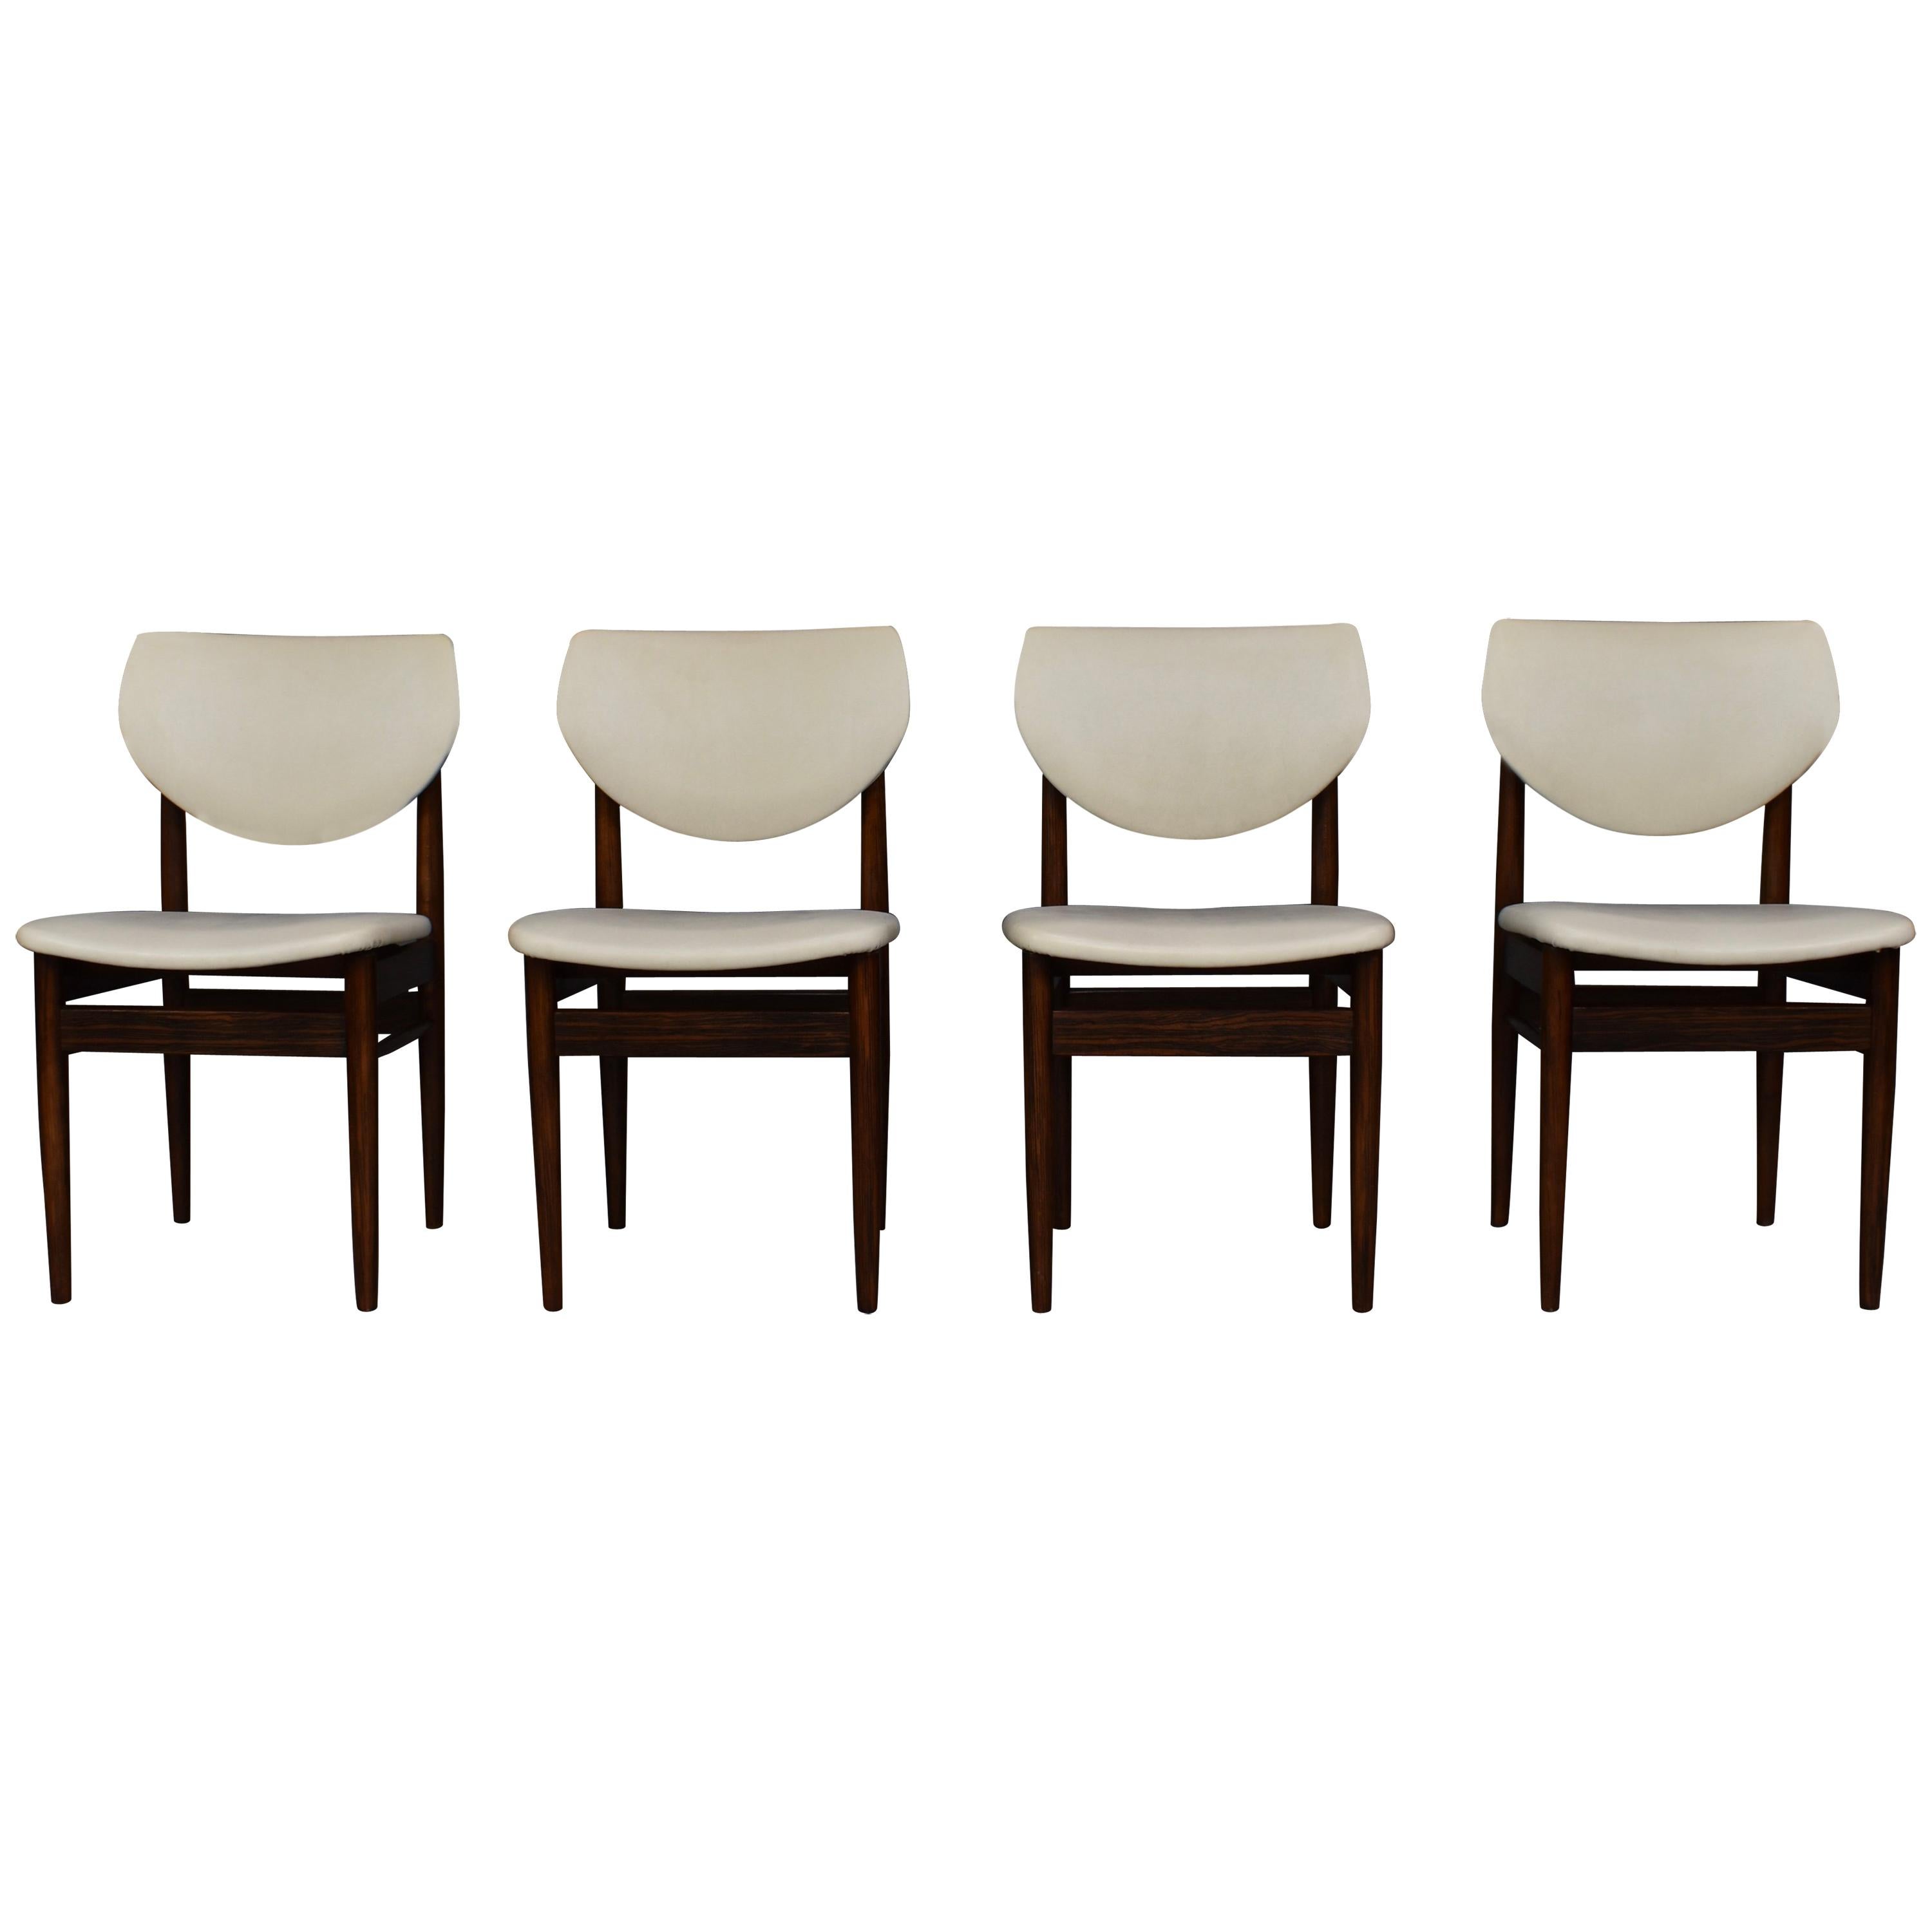 Set of Four Wenge Dining Room Chairs, circa 1960